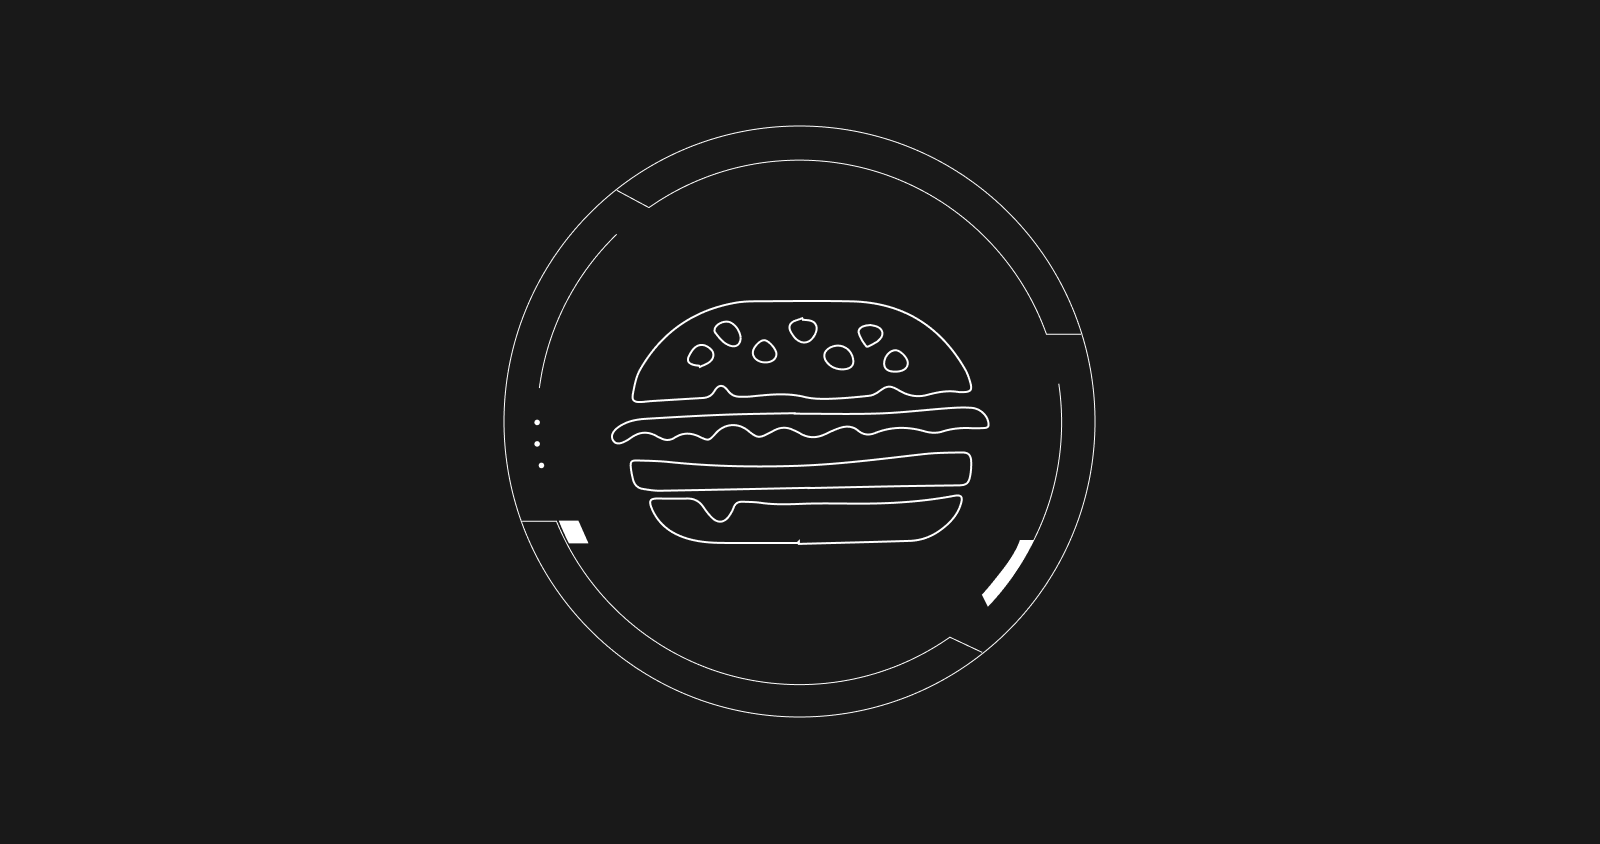 BurgerSwap: What Is It and How Does It Work?